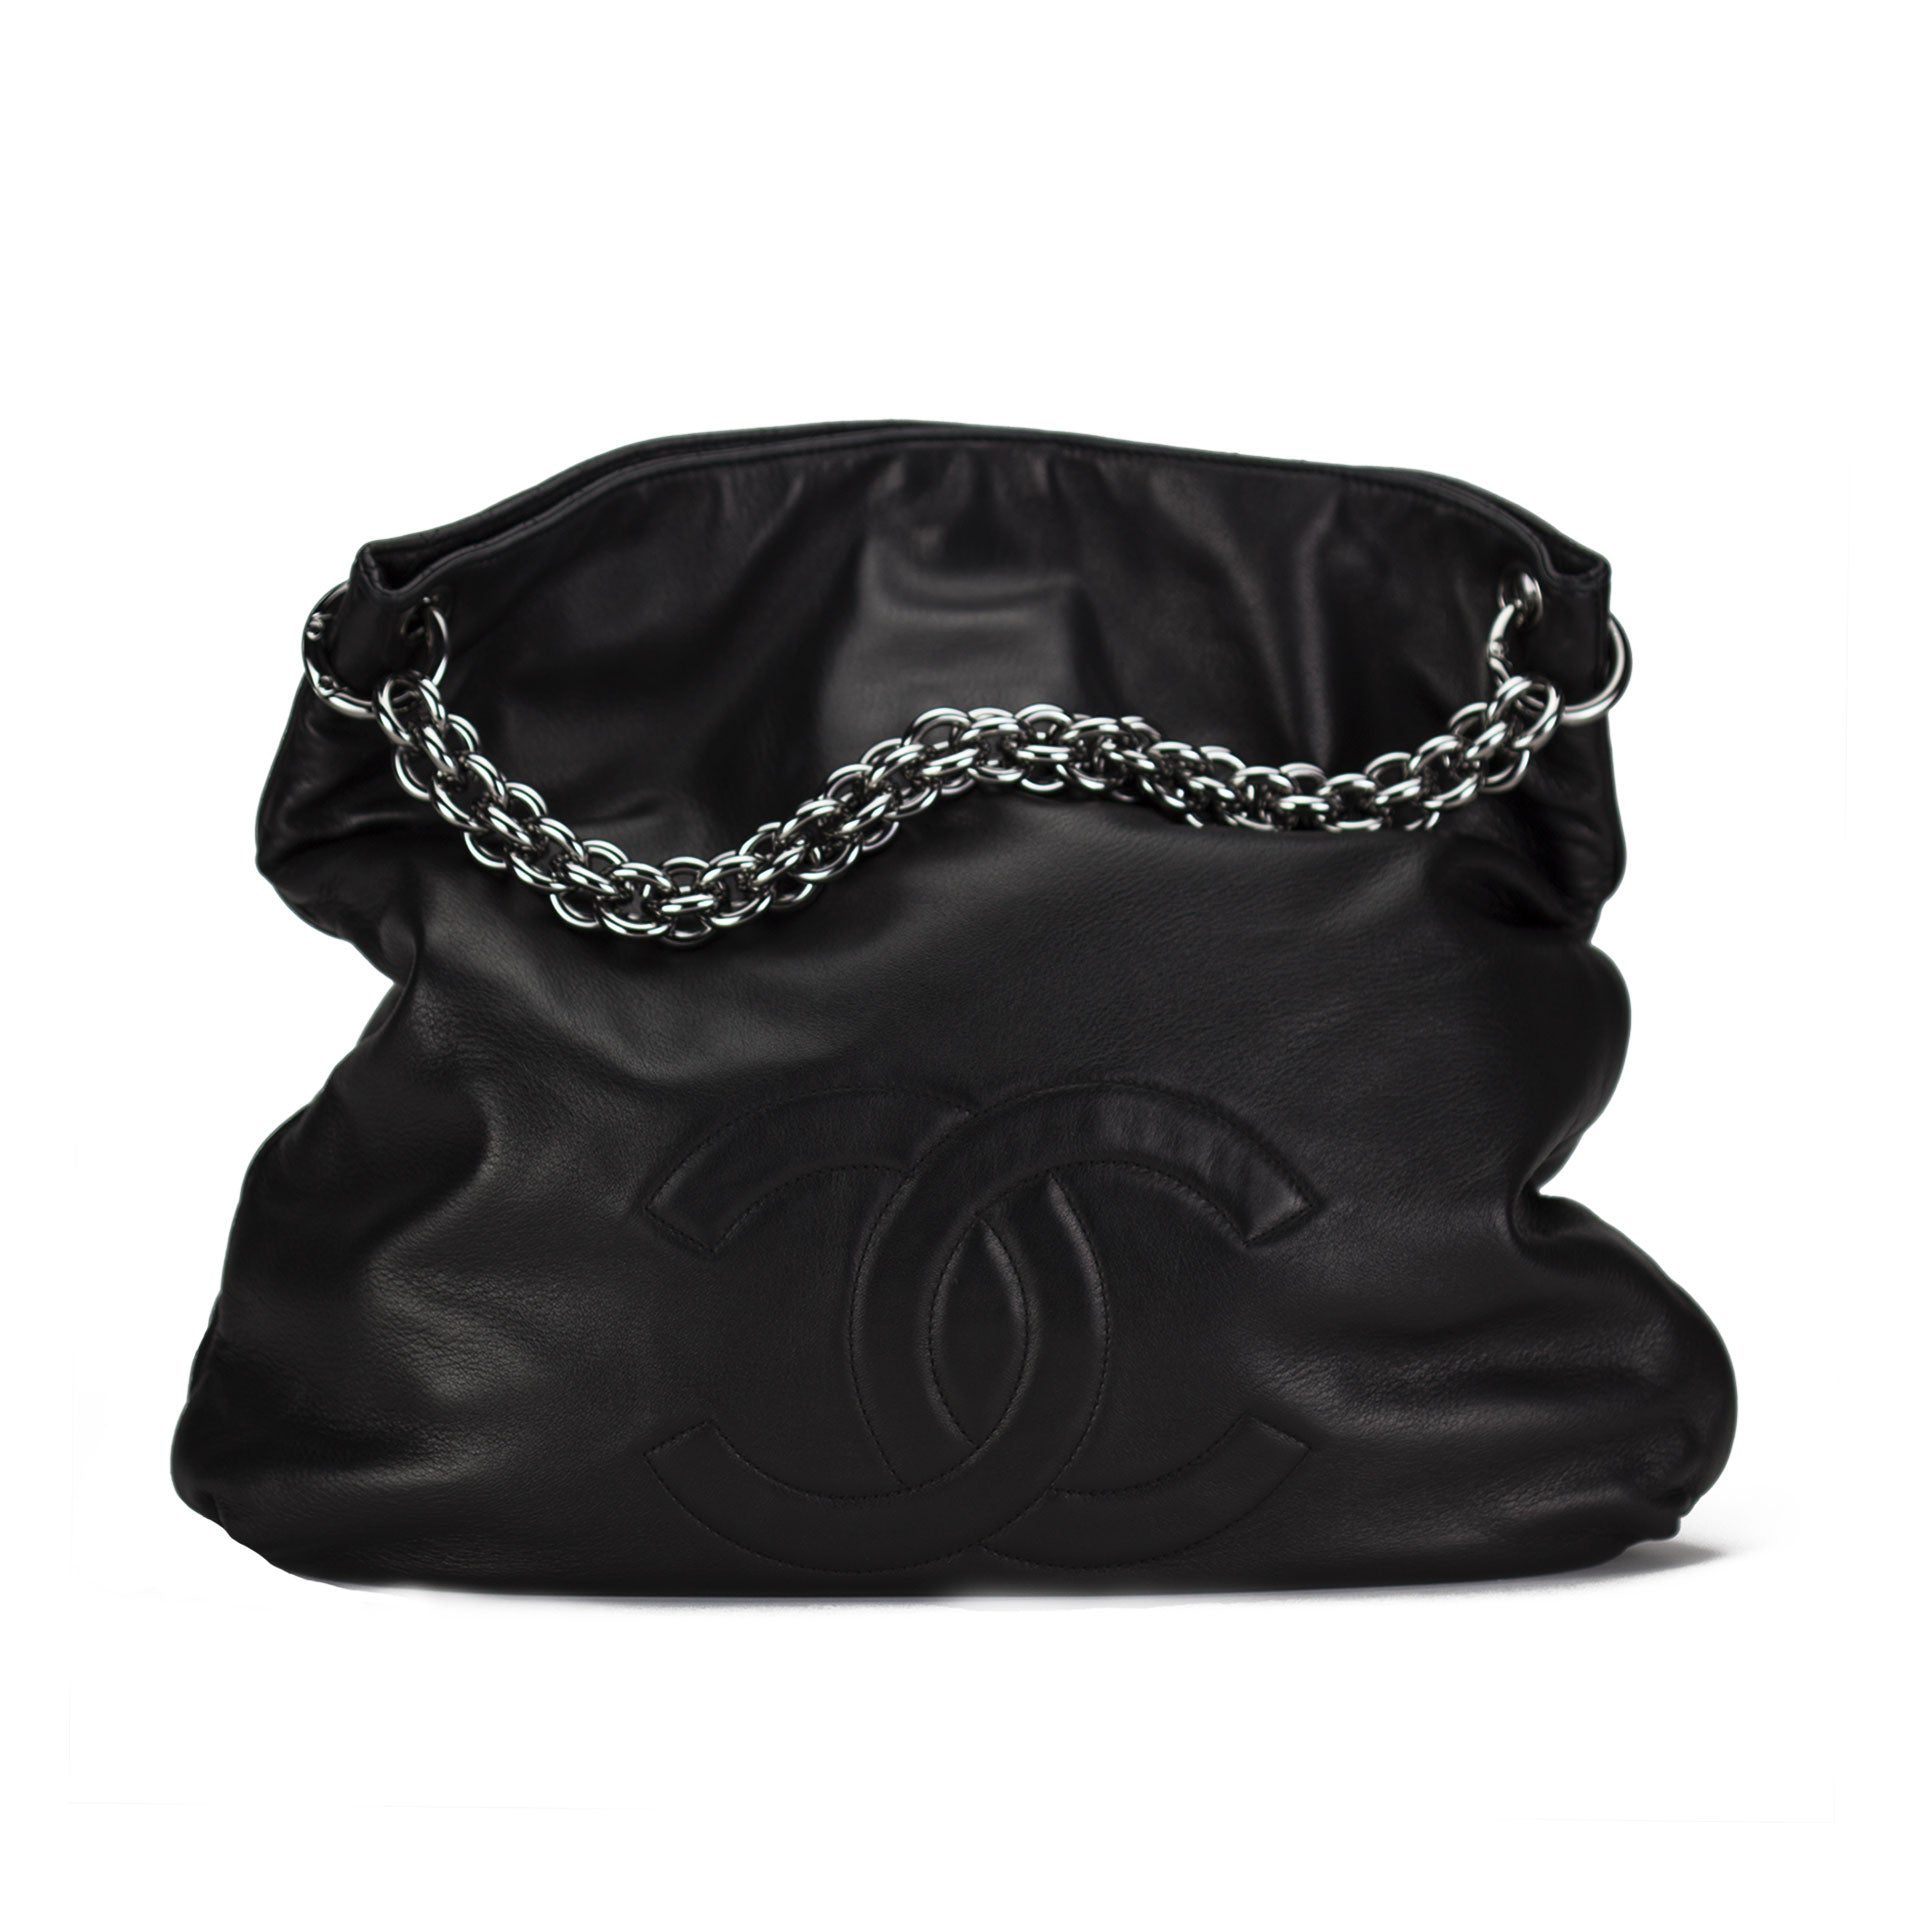 I Bought Myself The Chanel Chain Tote Bag At Auction! - Fashion For Lunch.